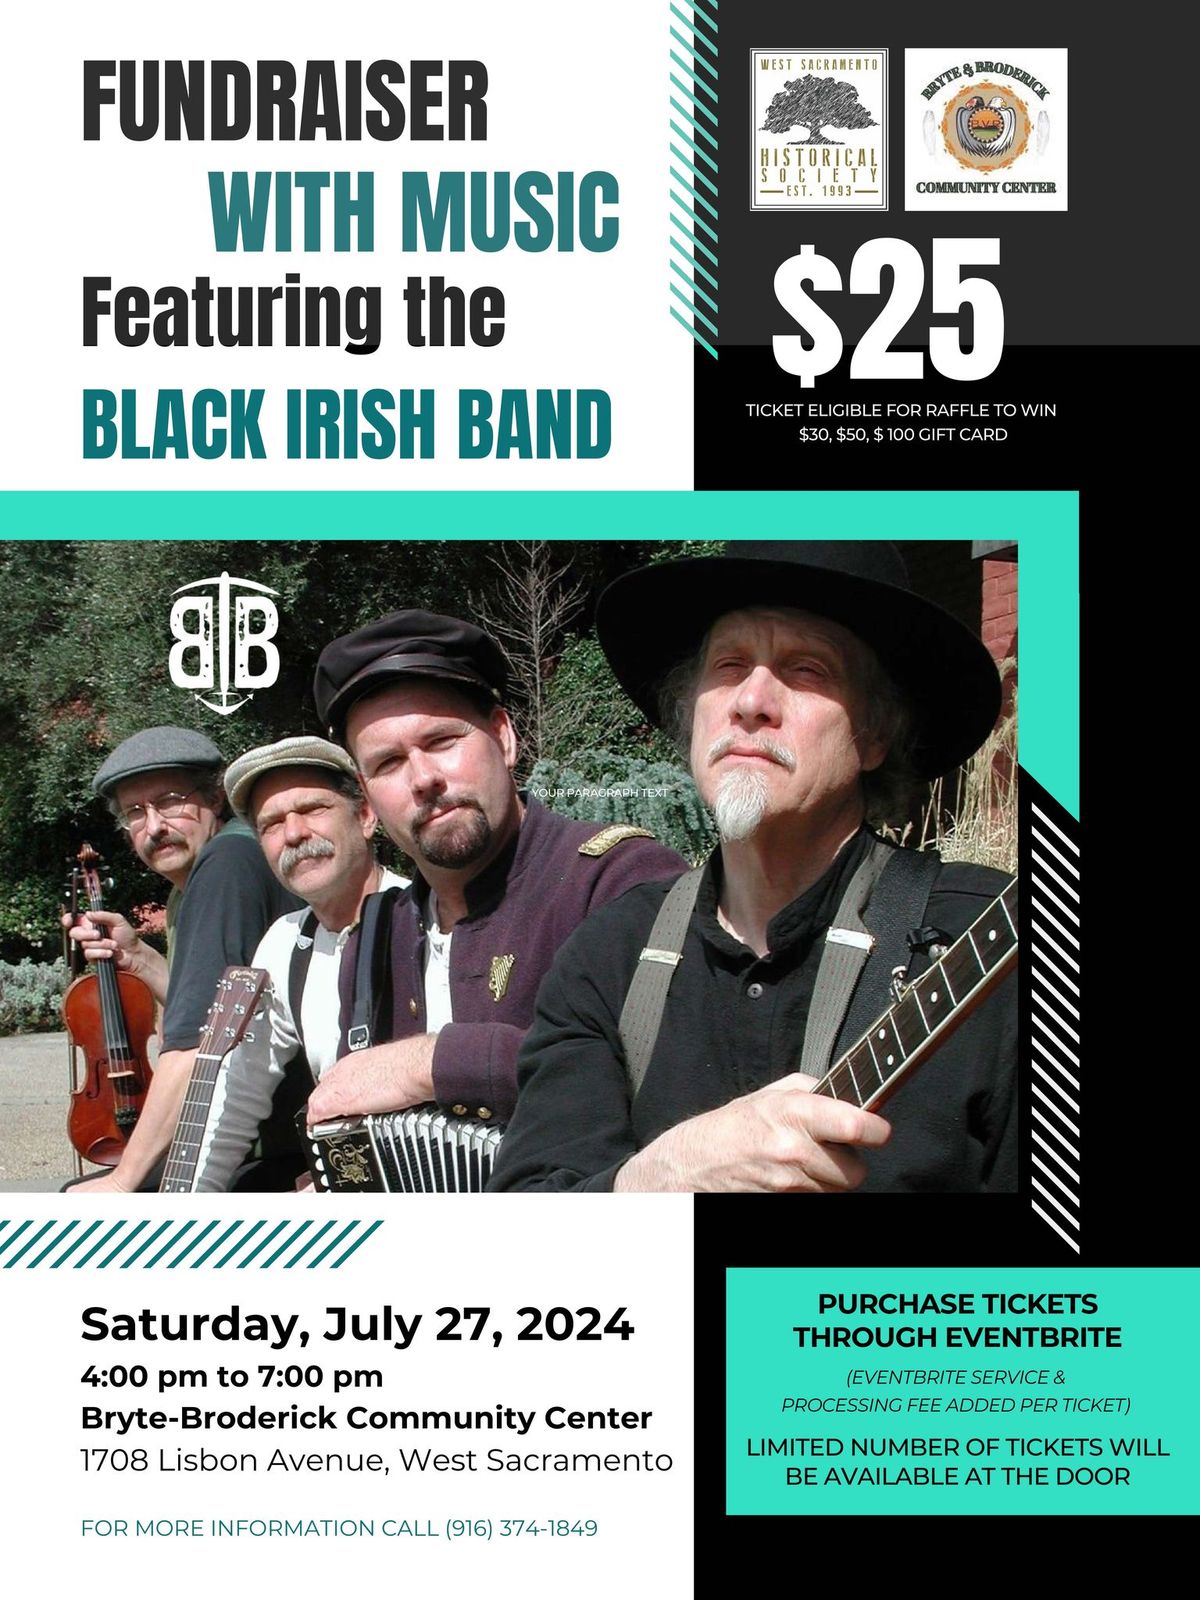 Fundraiser featuring music by the Black Irish Band